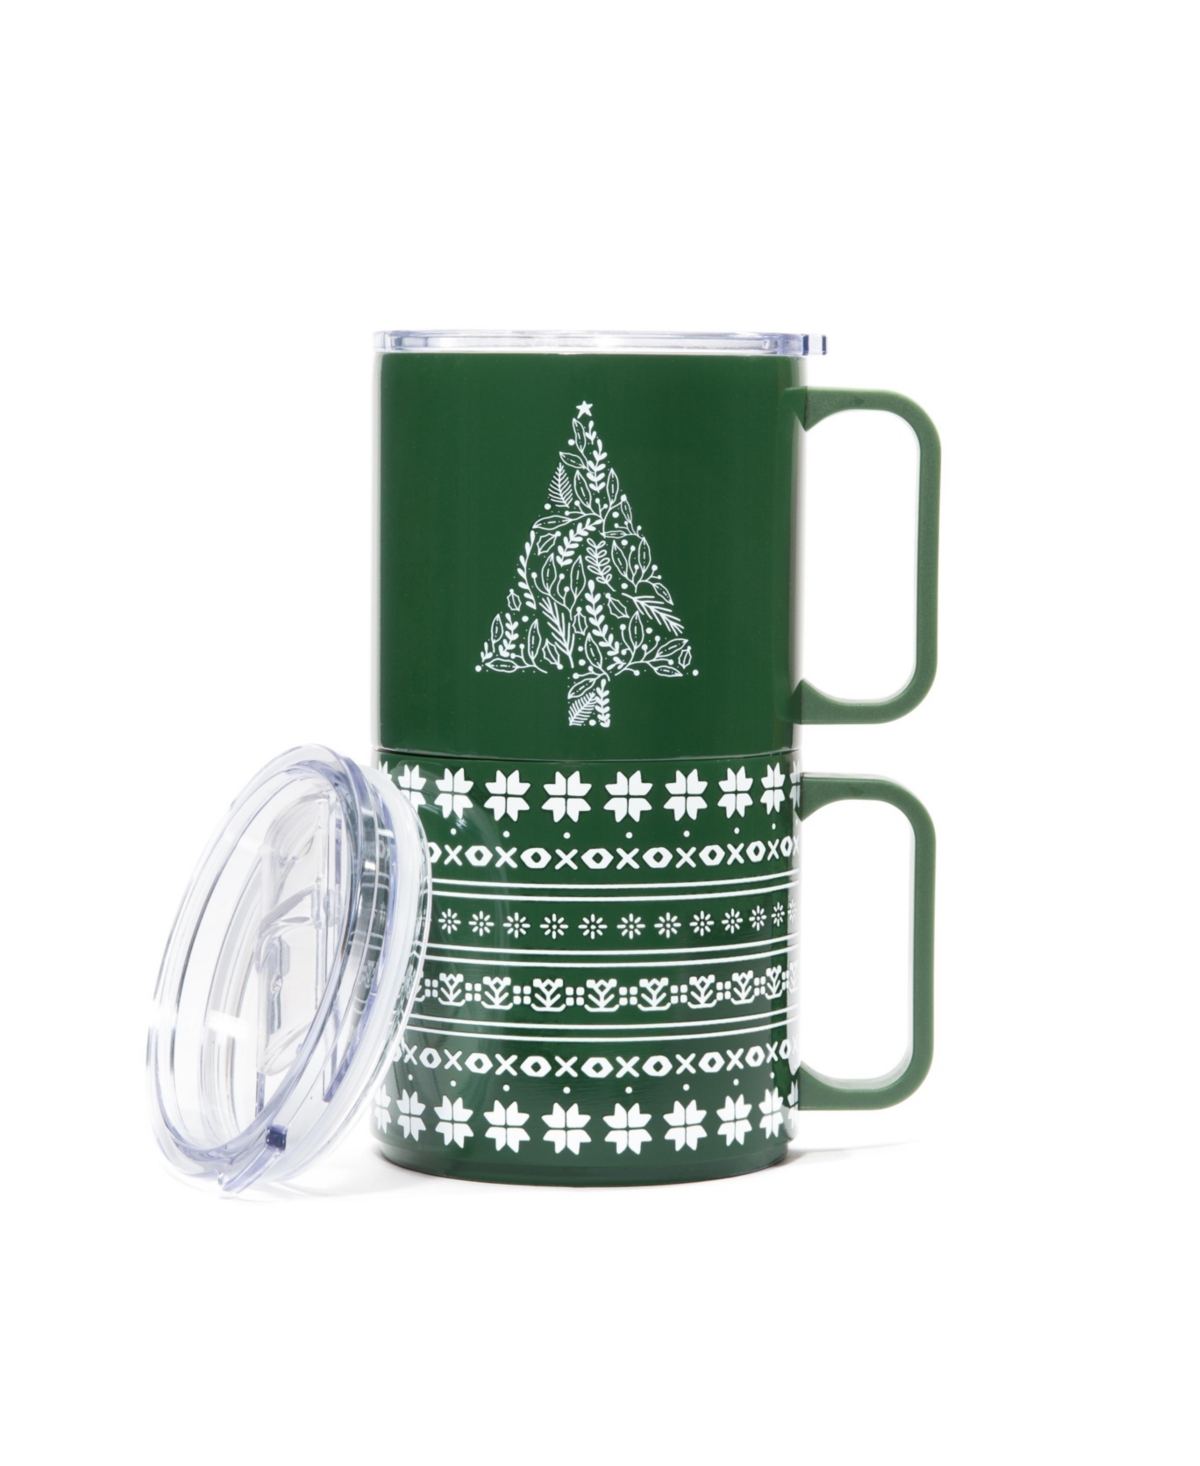 Cambridge Stackable Tree Insulated Coffee Mugs, Set Of 2 In Green